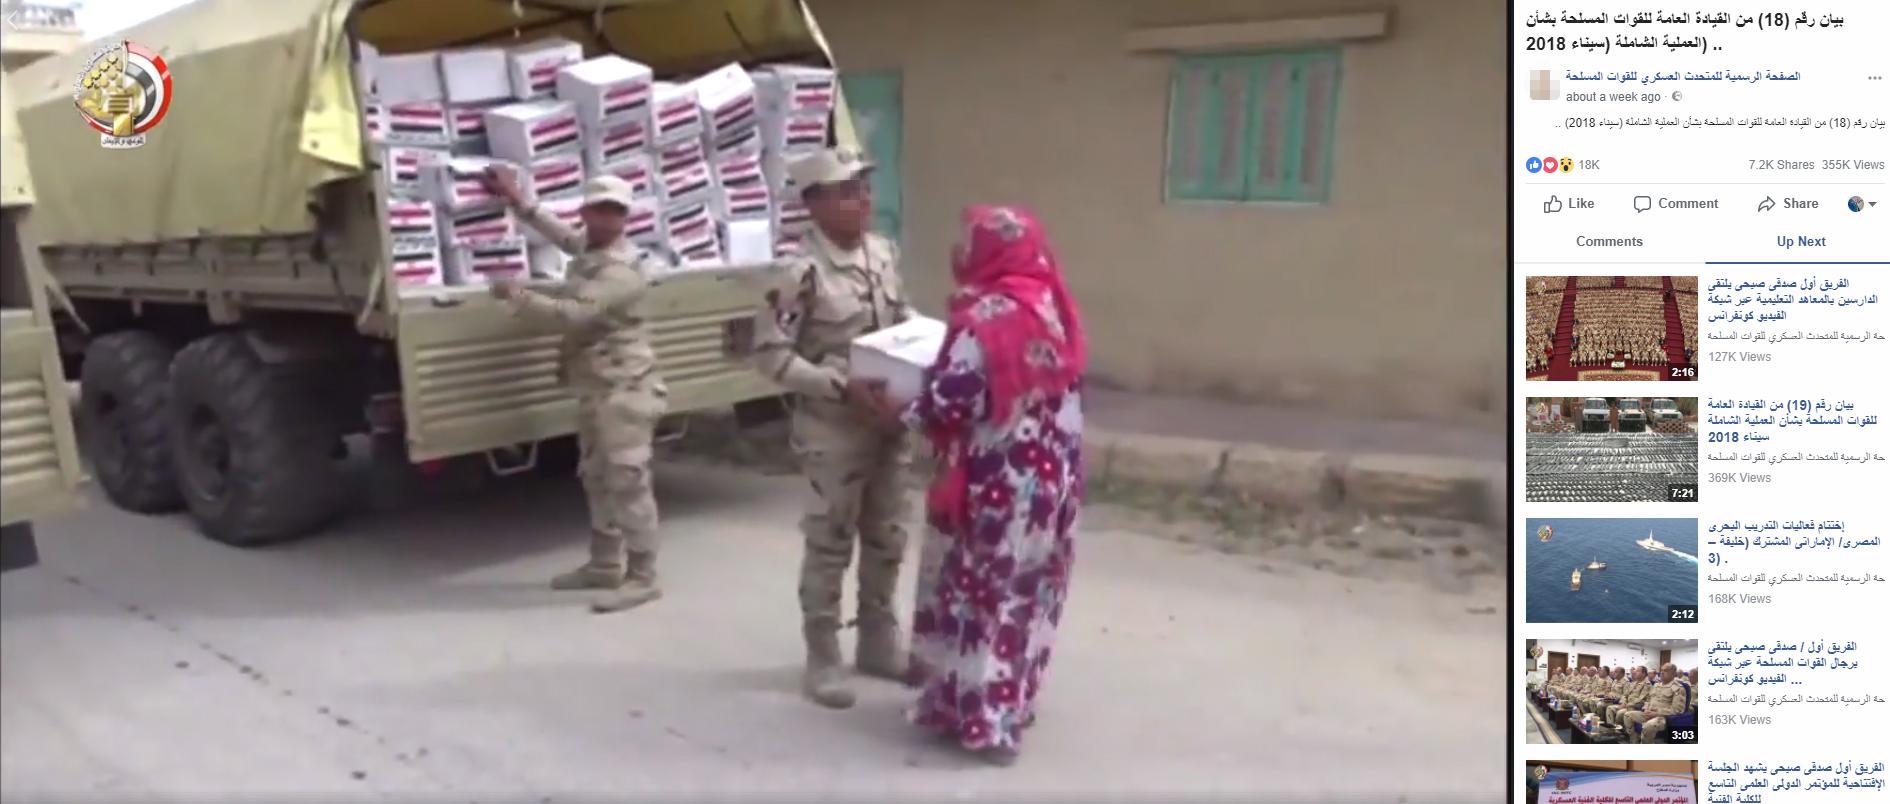 Still image from a video posted on the Egyptian Army Official Spokesman Facebook Page on April 8, apparently showing army distributing boxes of free food to some residents in North Sinai. Witnesses said free food distributed was very limited and did not meet their needs.